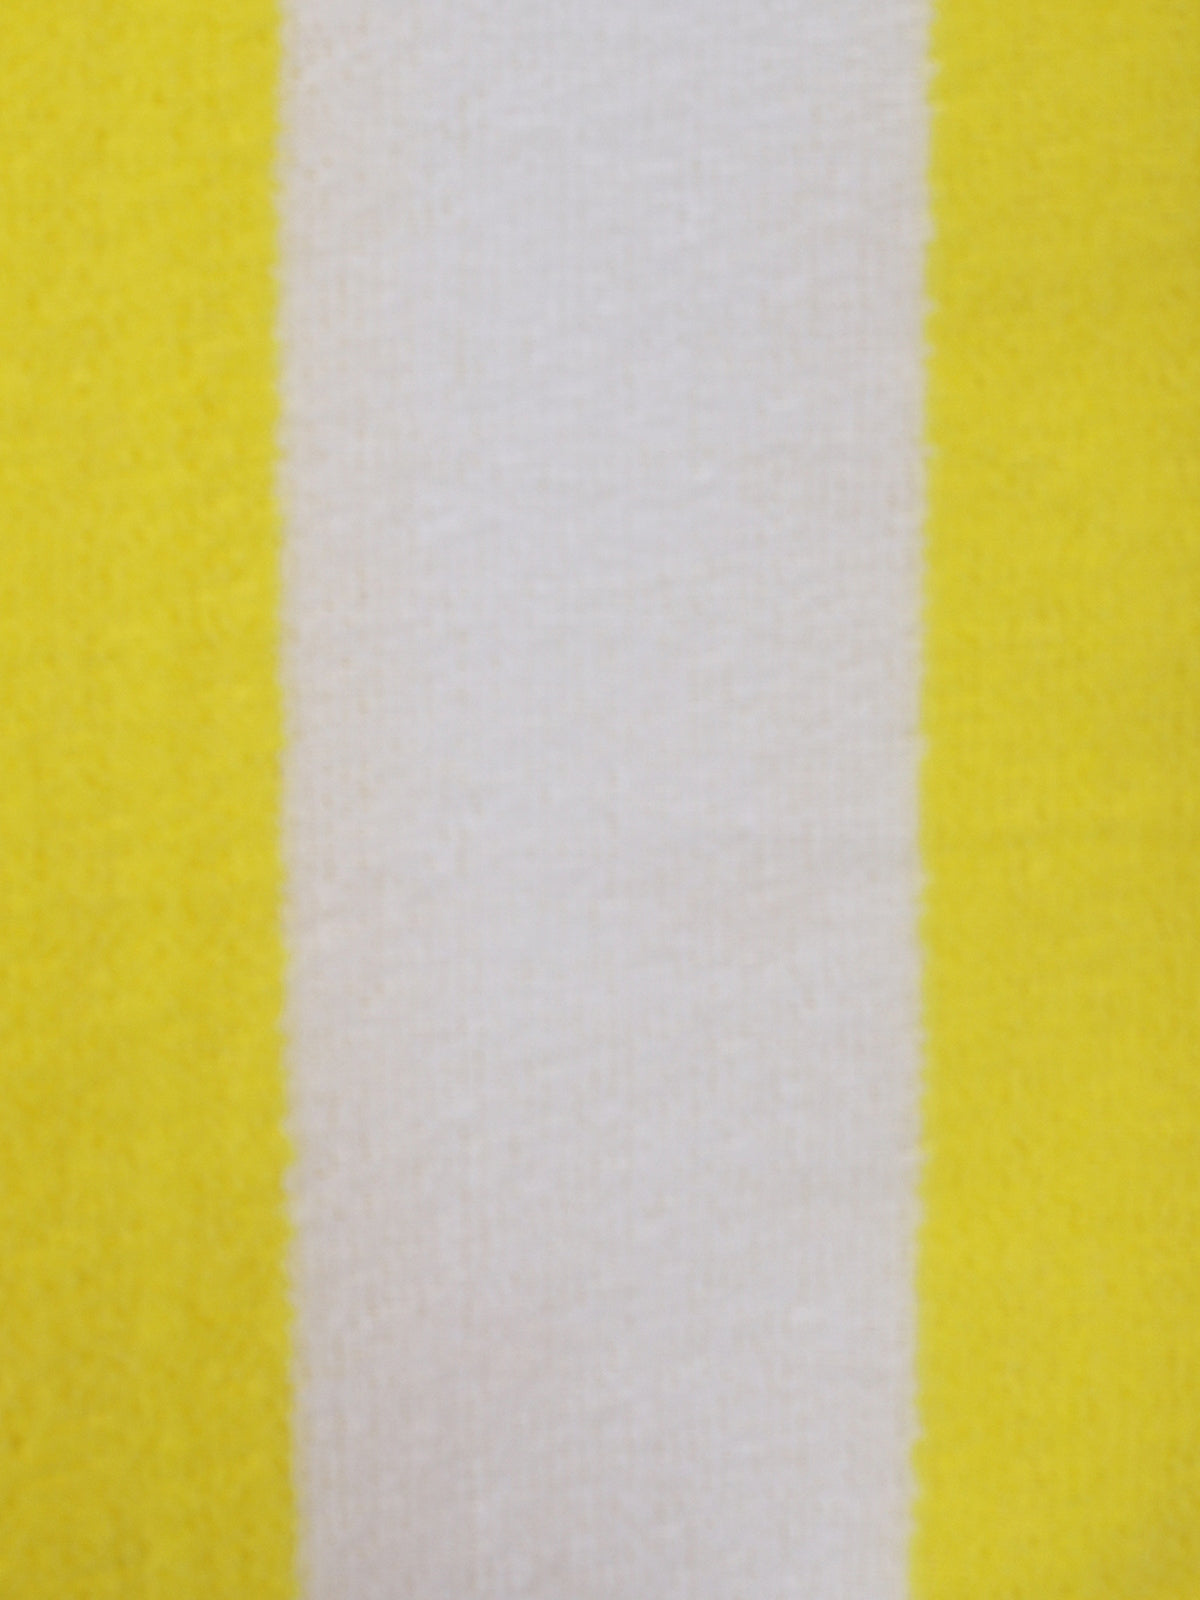 Yellow Stripes Patterned Microfiber Towel